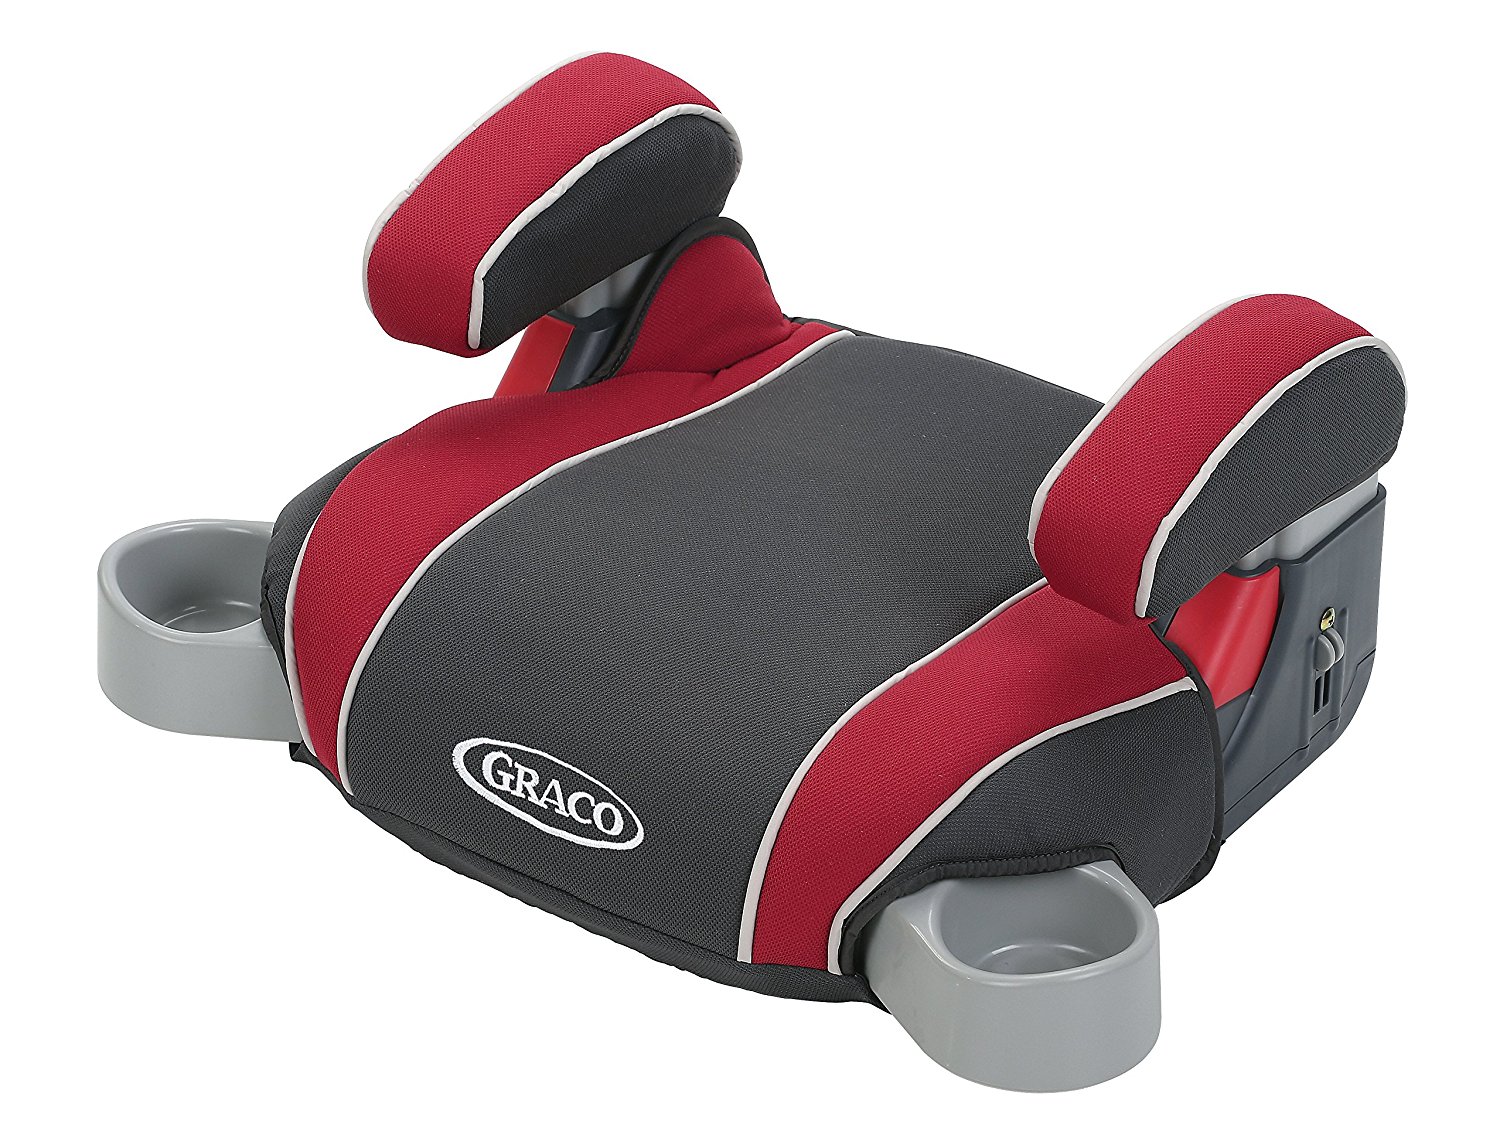 Graco Backless Turbo Booster Car Seat – Just $12.88!